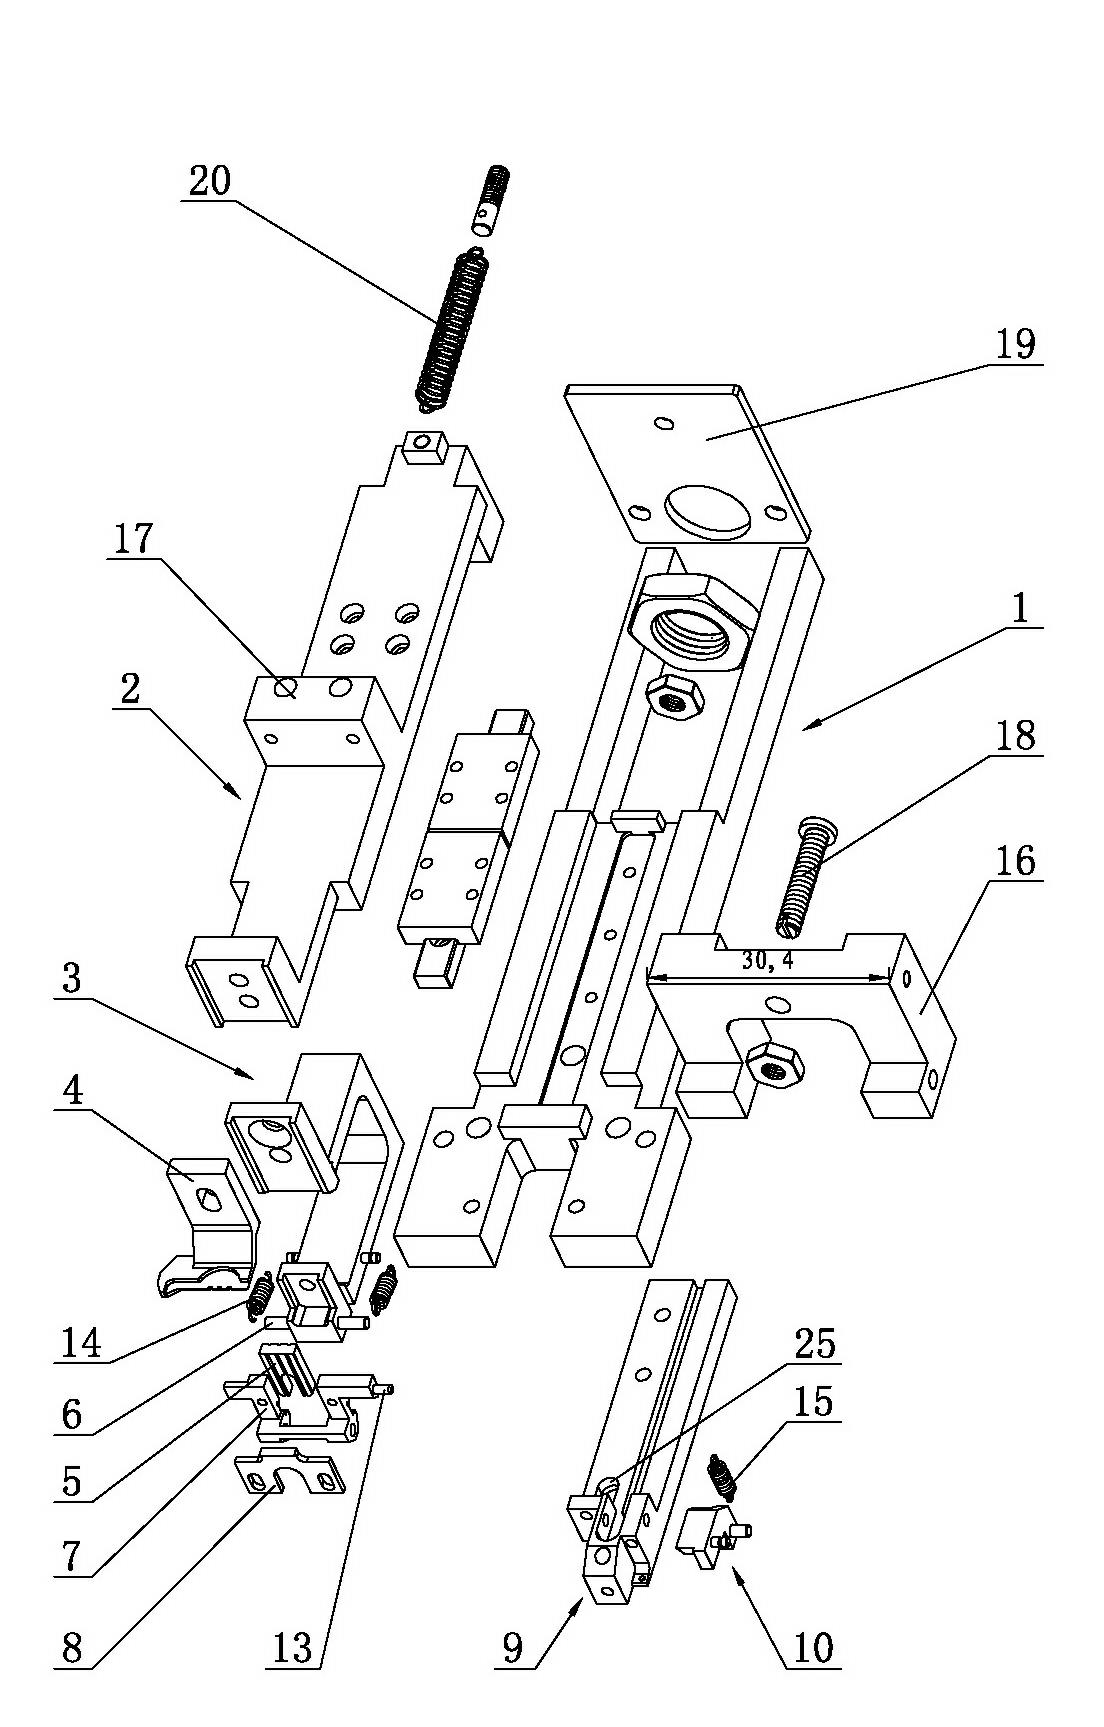 Clamping and opening/closing linkage mechanism for chain-clamp material discharging